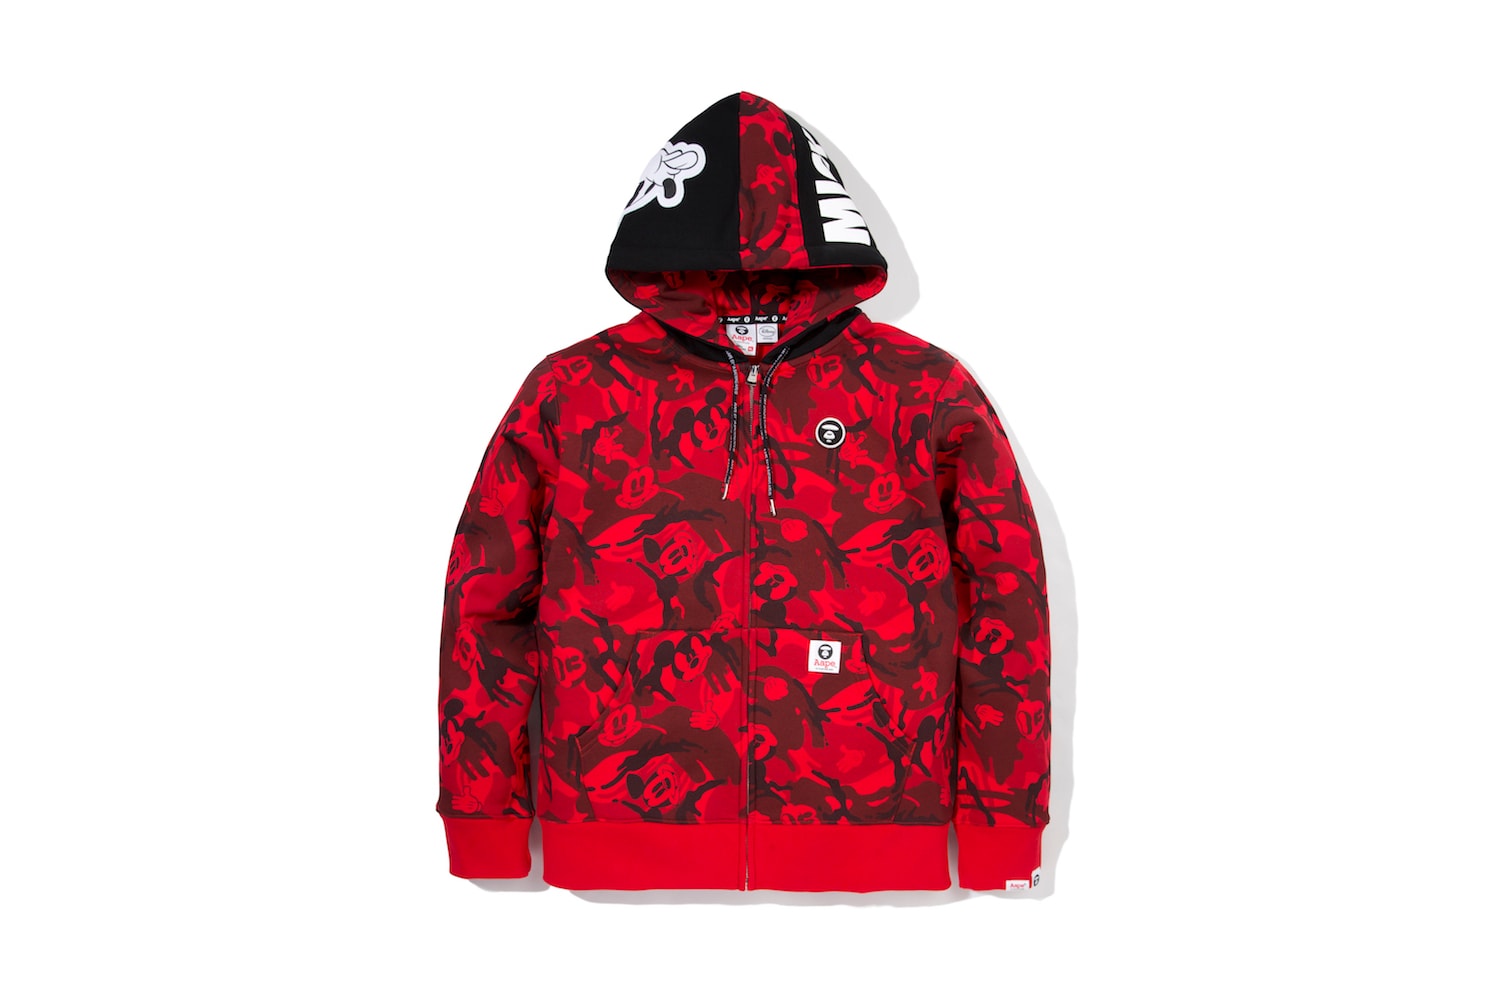 AAPE BY A BATHING APE® x Mickey Mouse 2016 Winter Collection